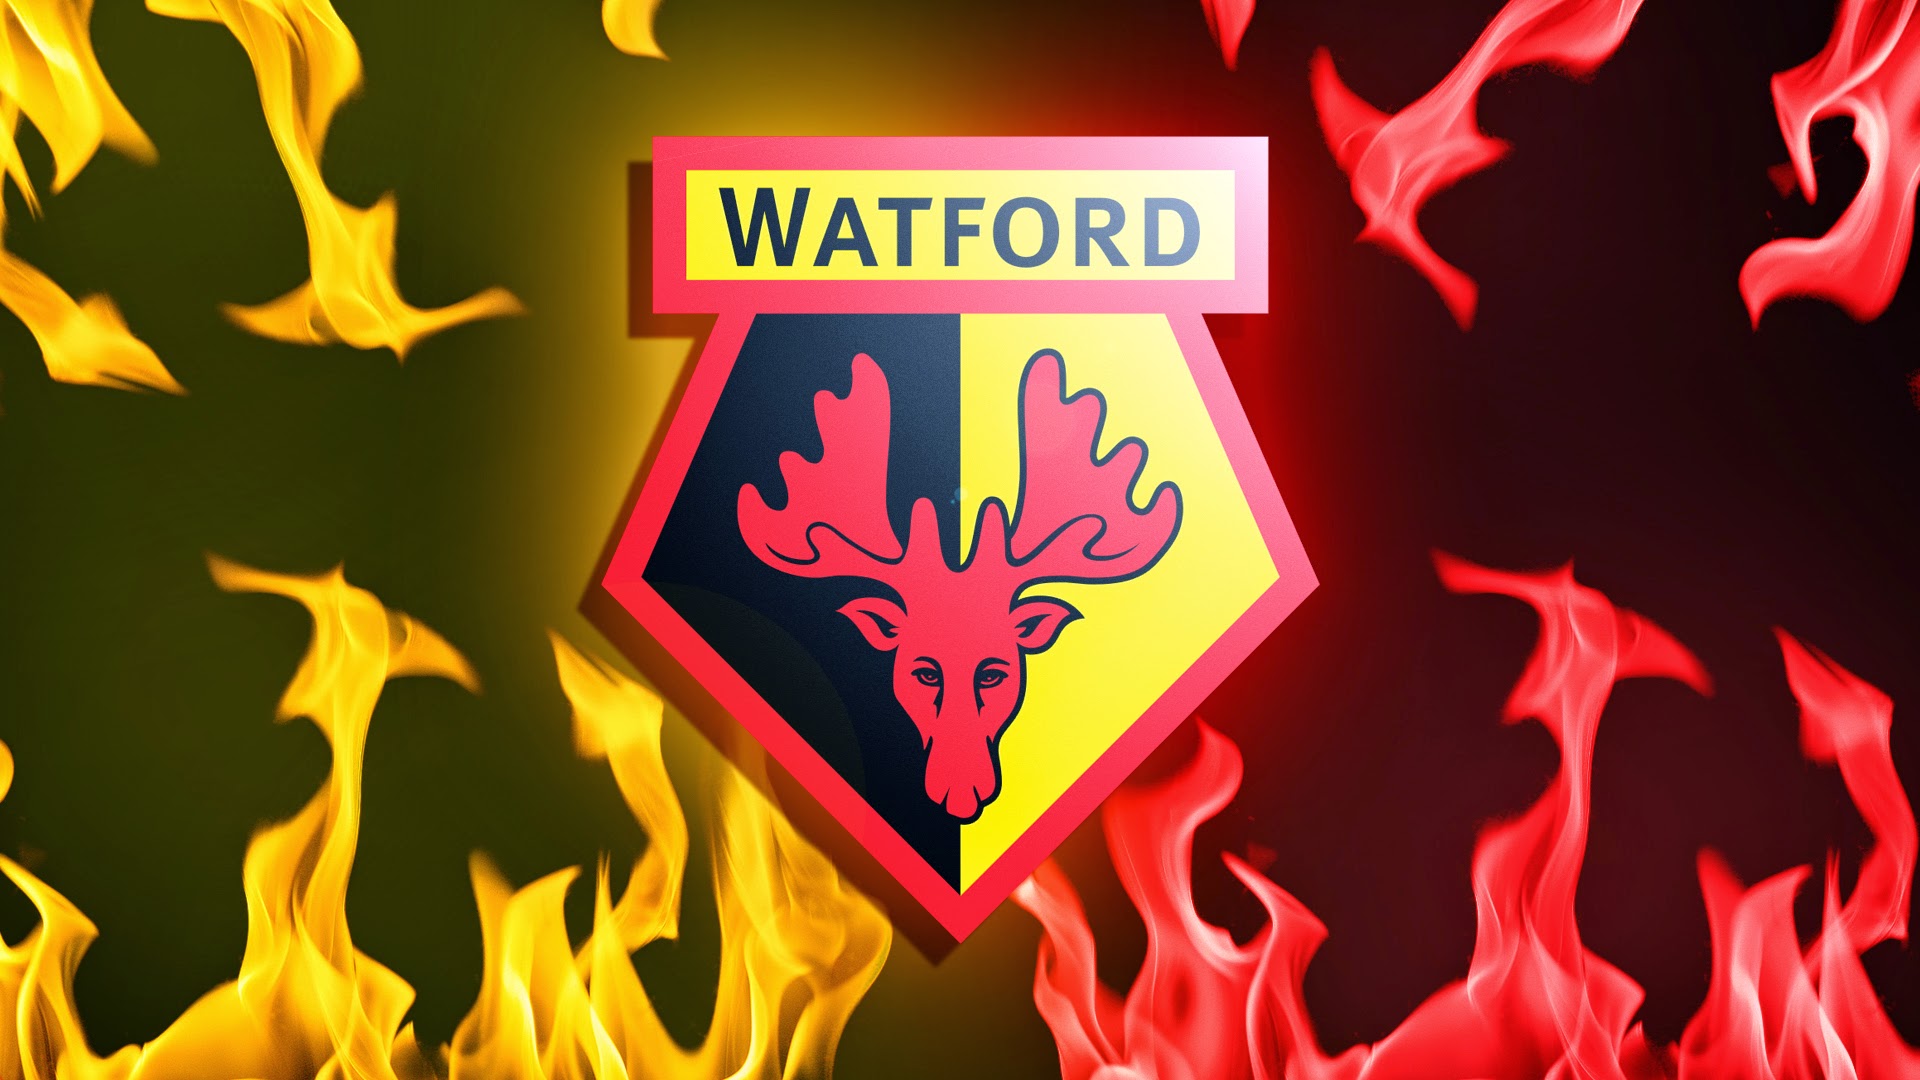 Watford Wallpaper HD Full Pictures